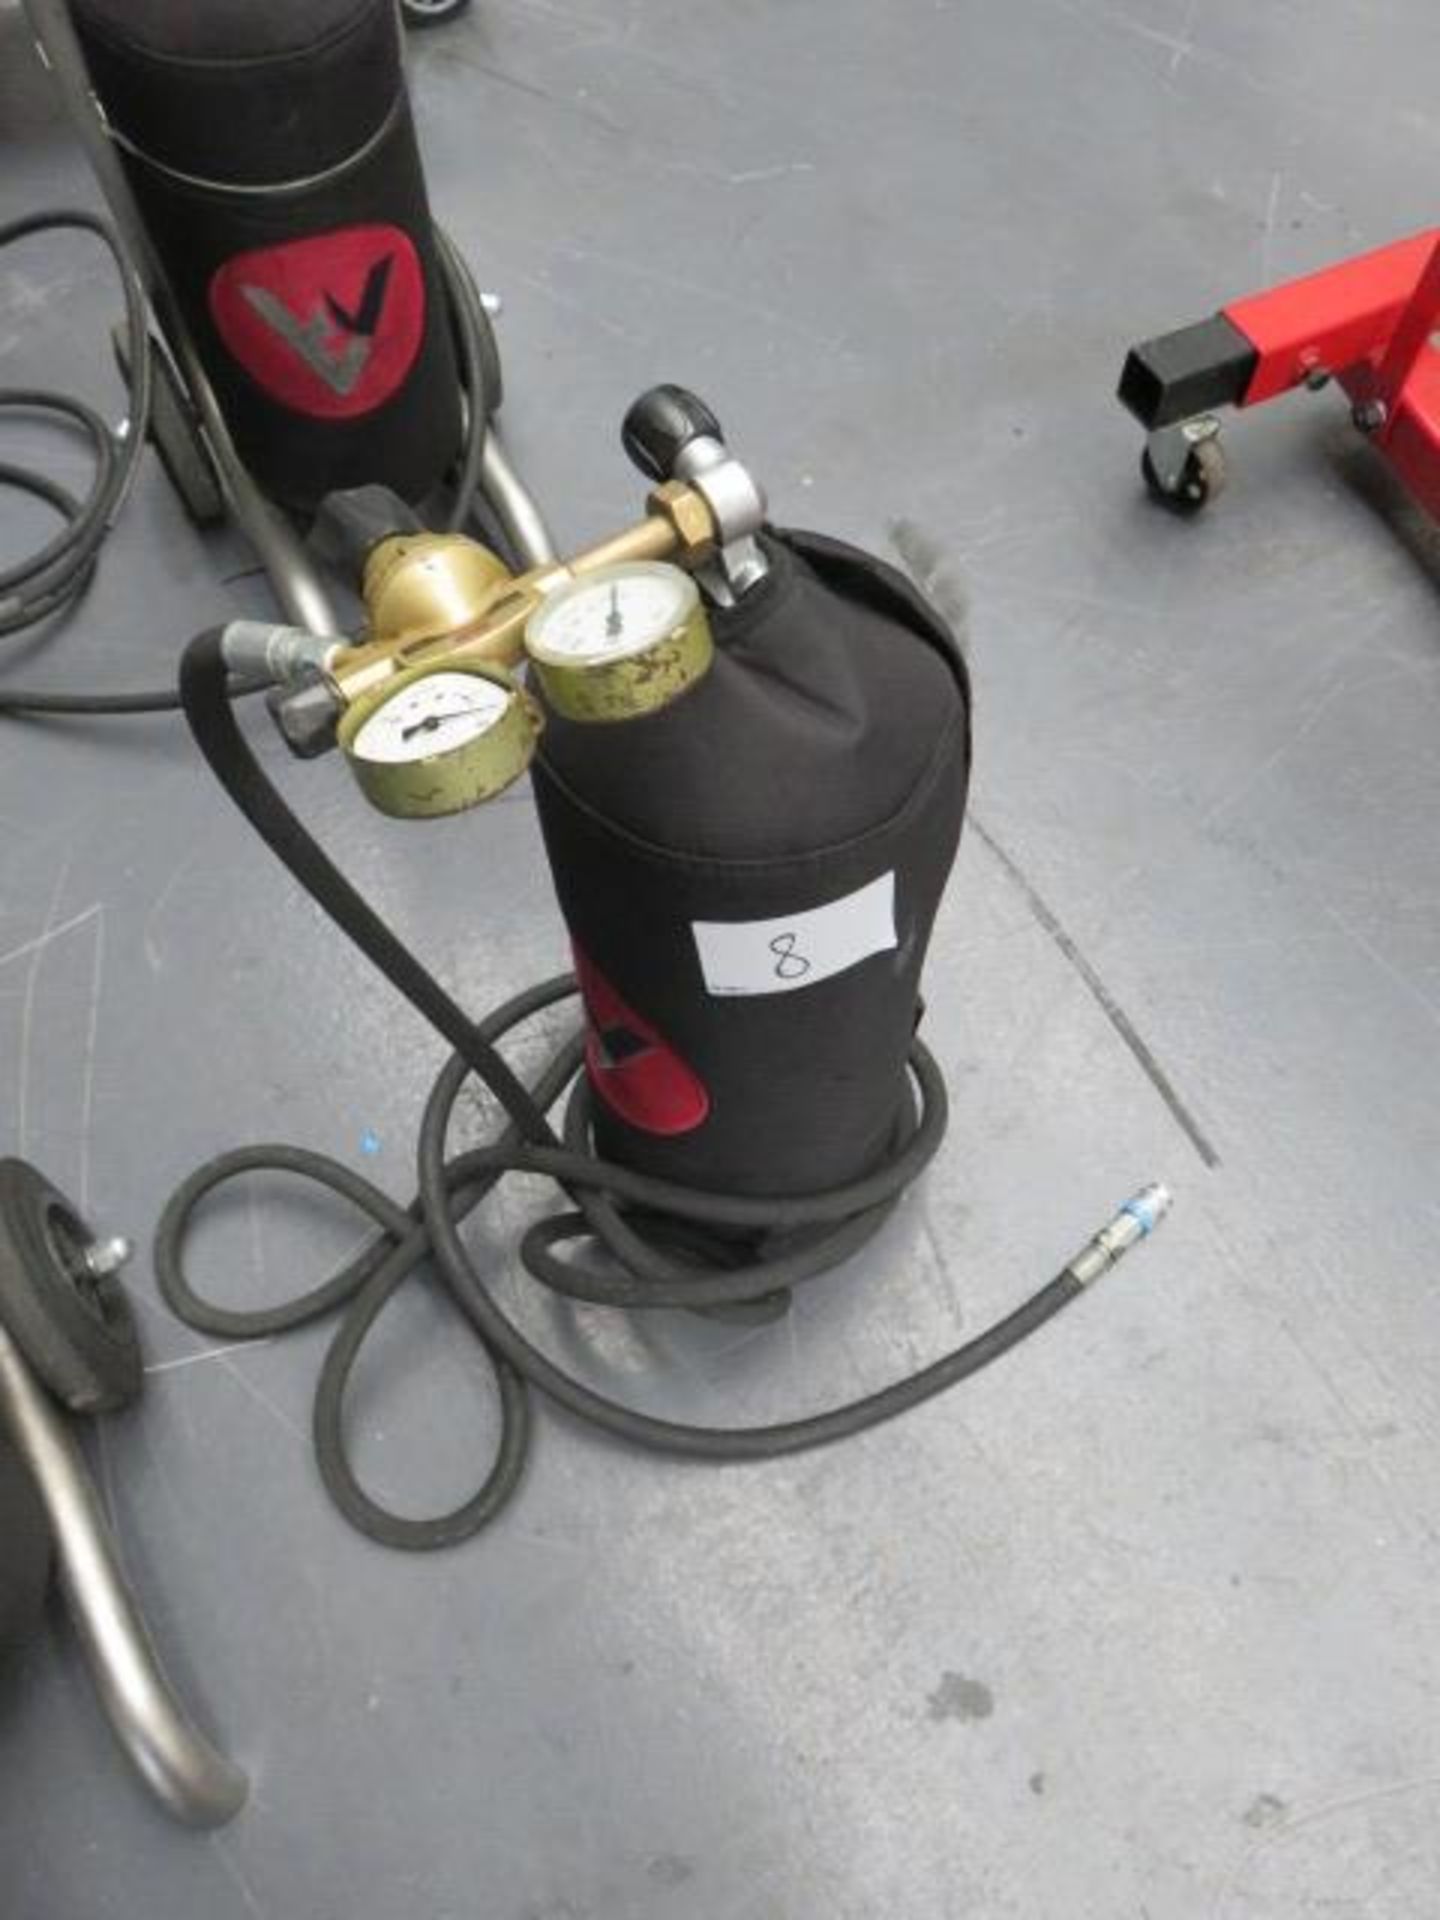 Krontec Compressed Air Bottle with Damaged GCE Regulator and Hose As Lotted